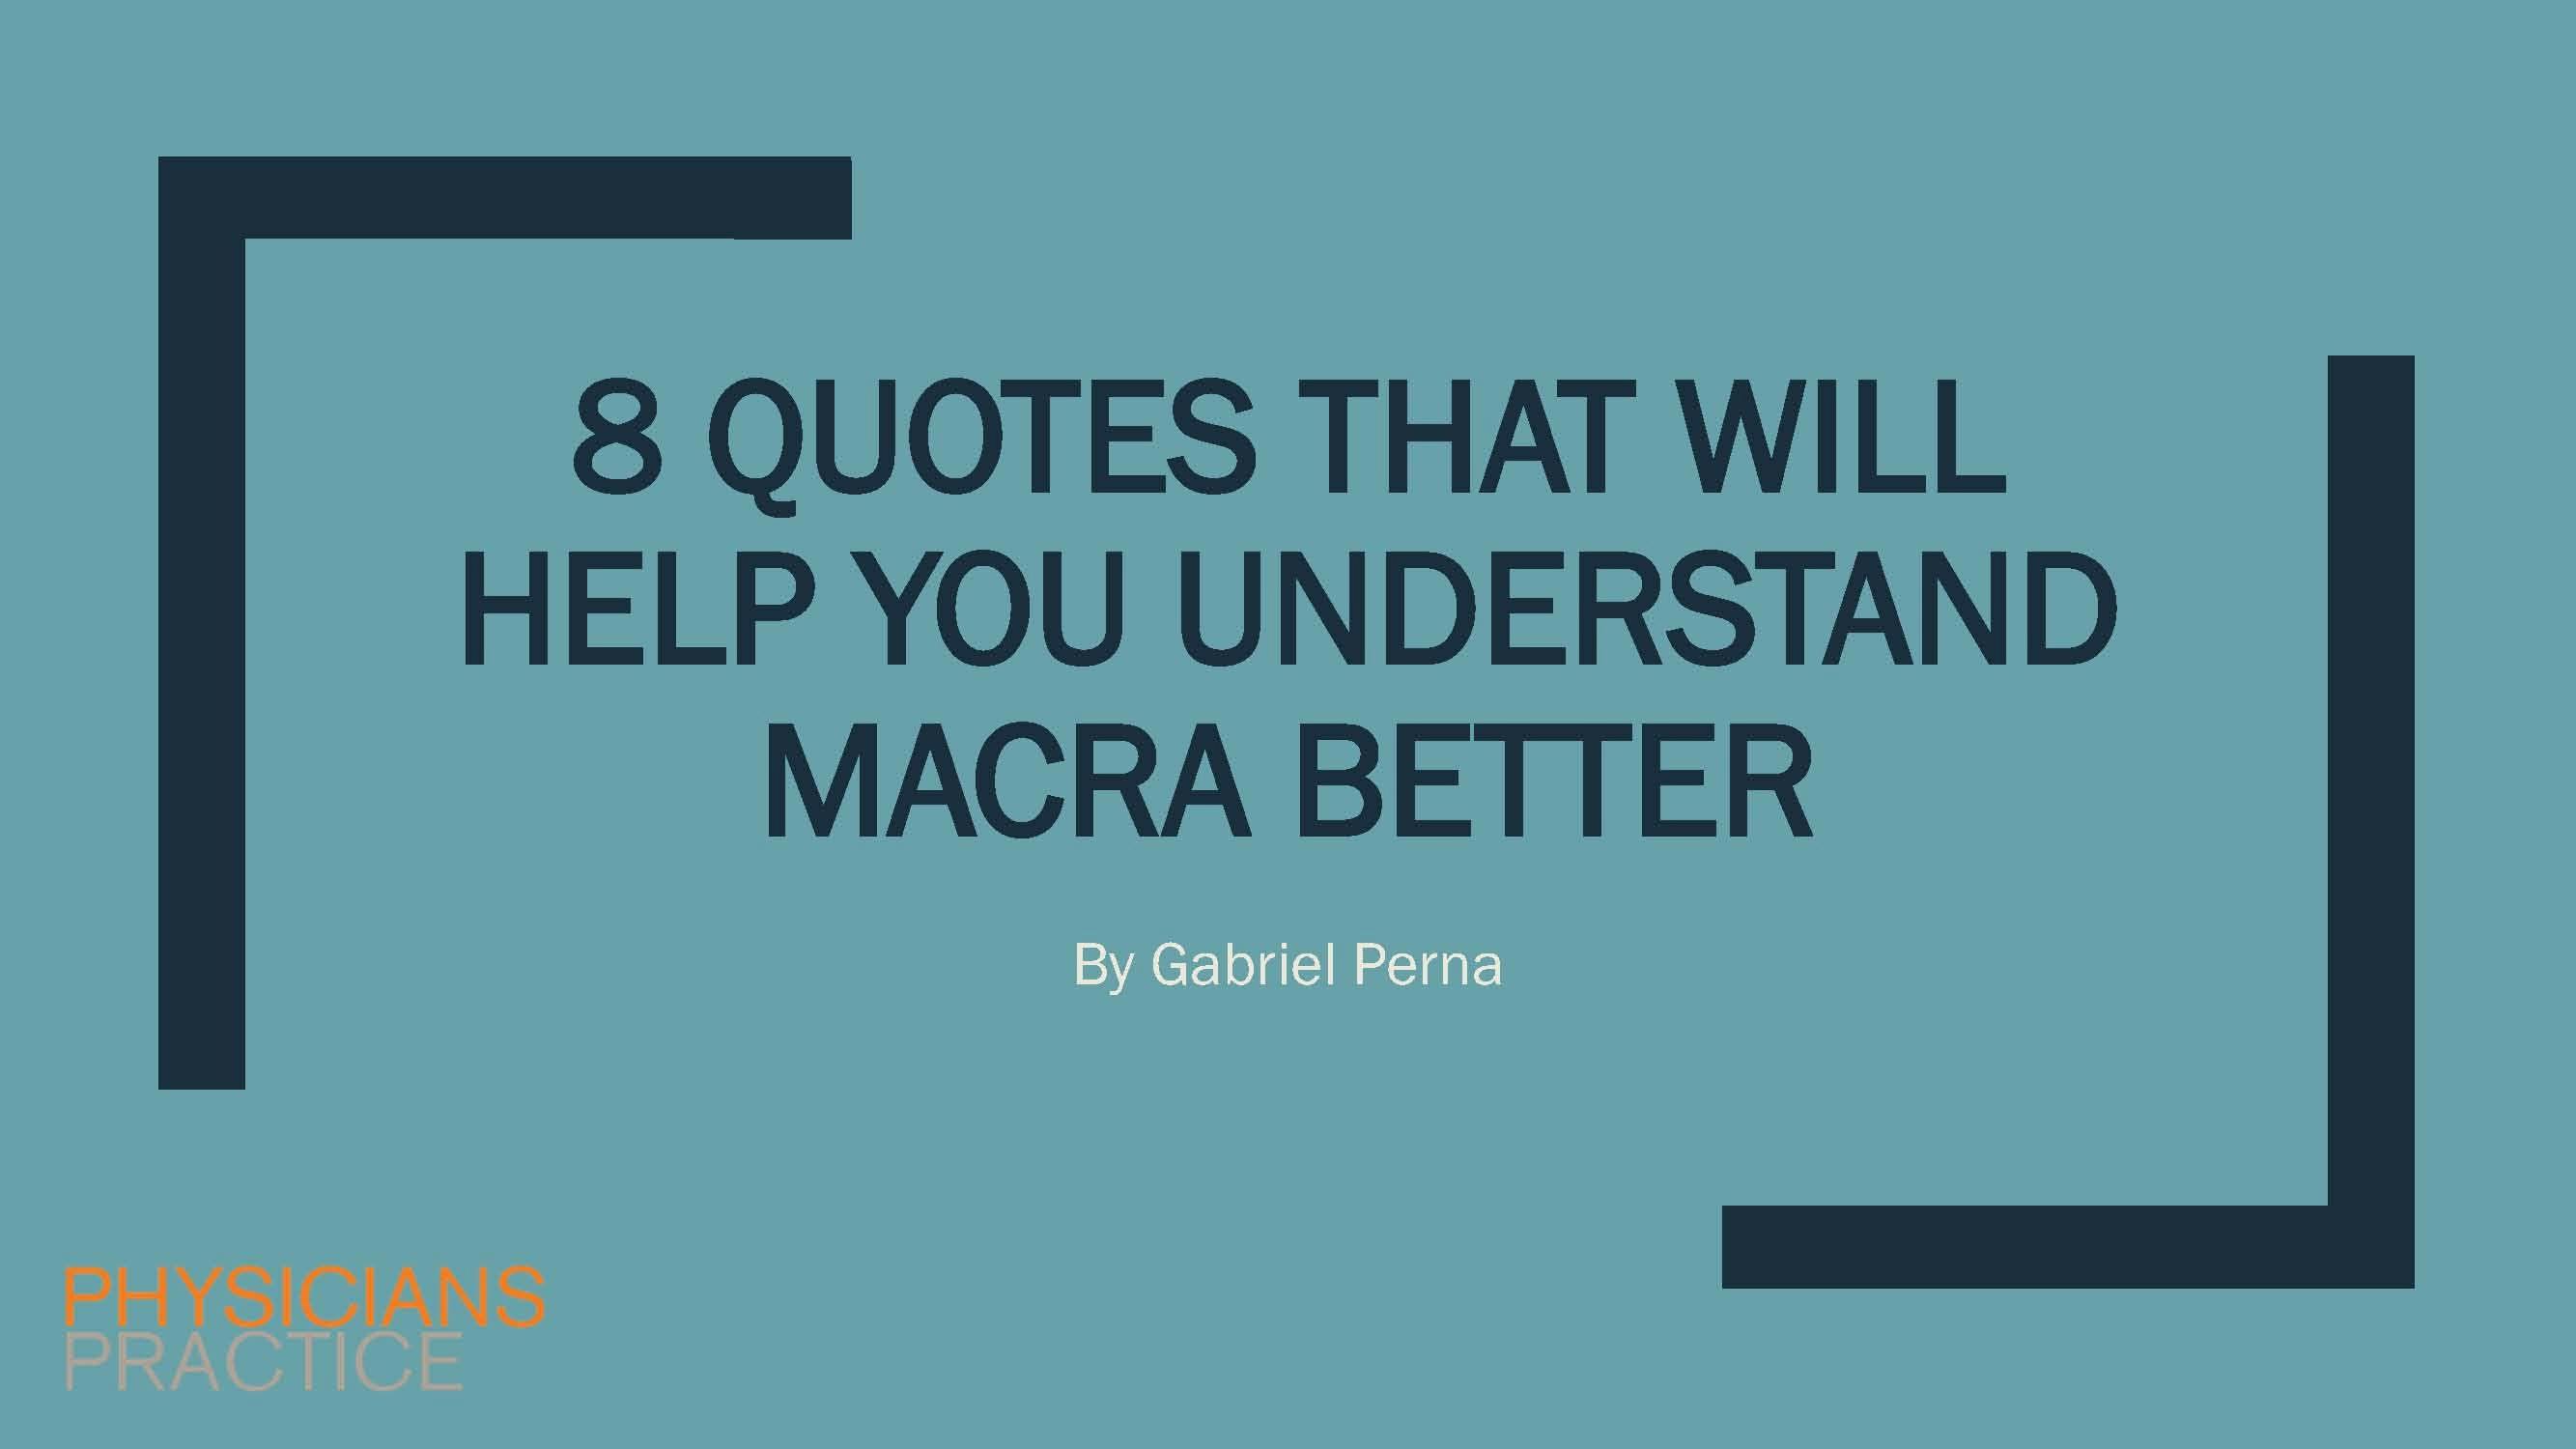 8 Quotes that Will Help You Understand MACRA Better